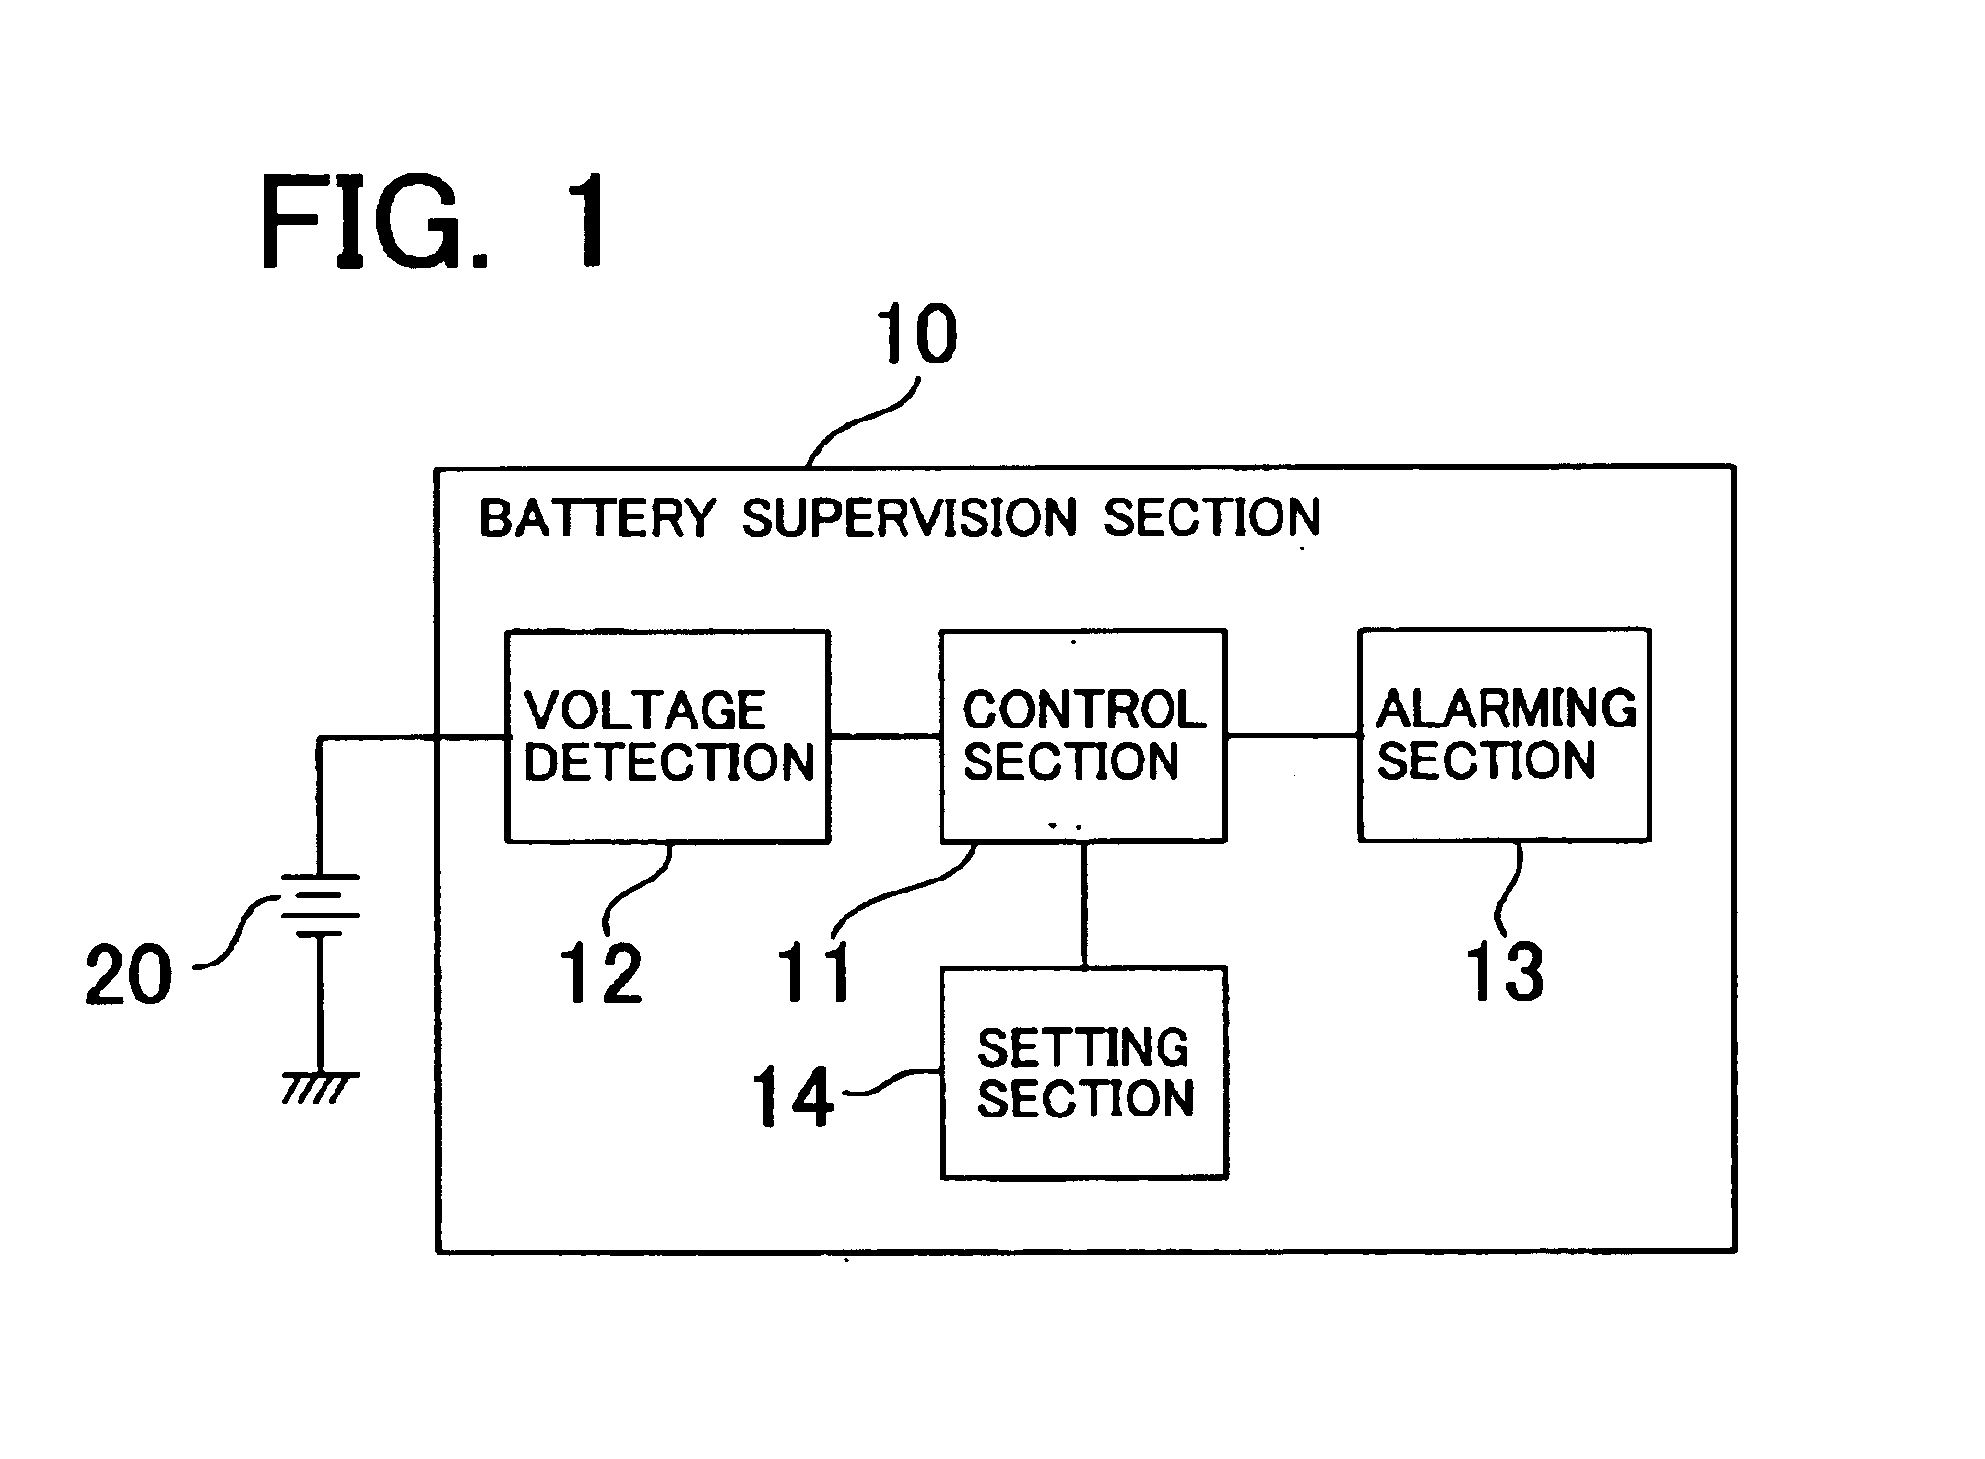 Portable telephone with a battery alarm function indicating lowest level for communication